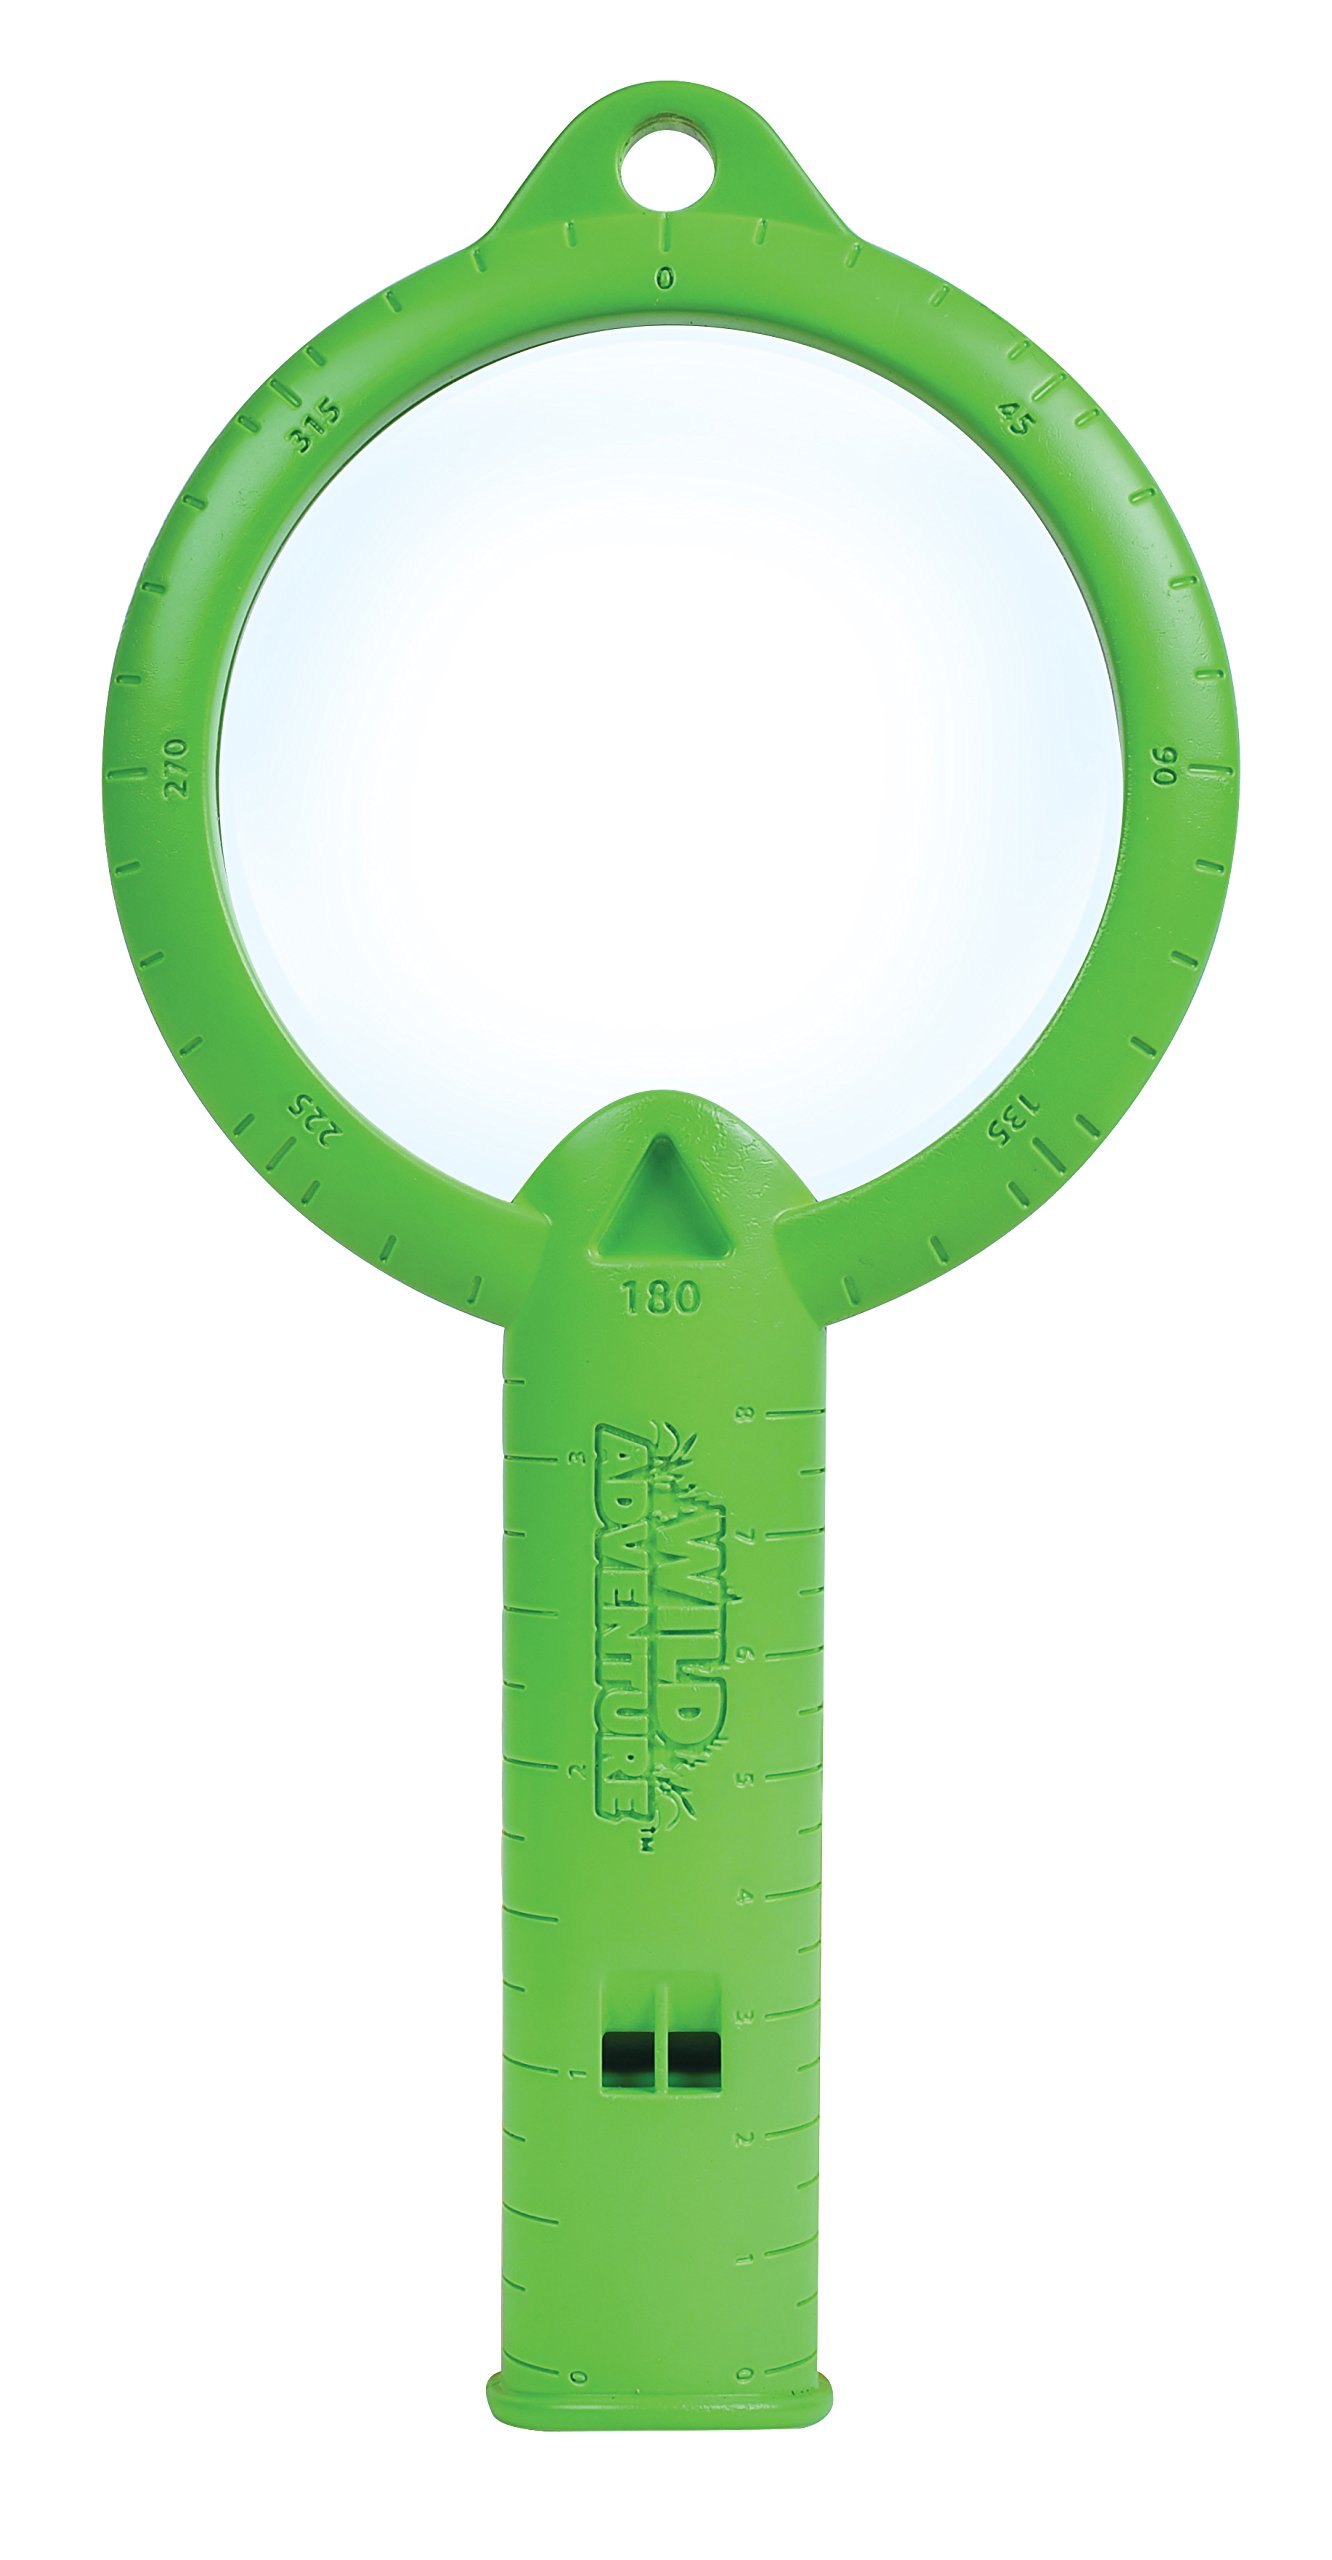 Wild Adventure Magnify Glass, Exploration, Play Reading Magnifier for Children, Great Stem Gift, 3+